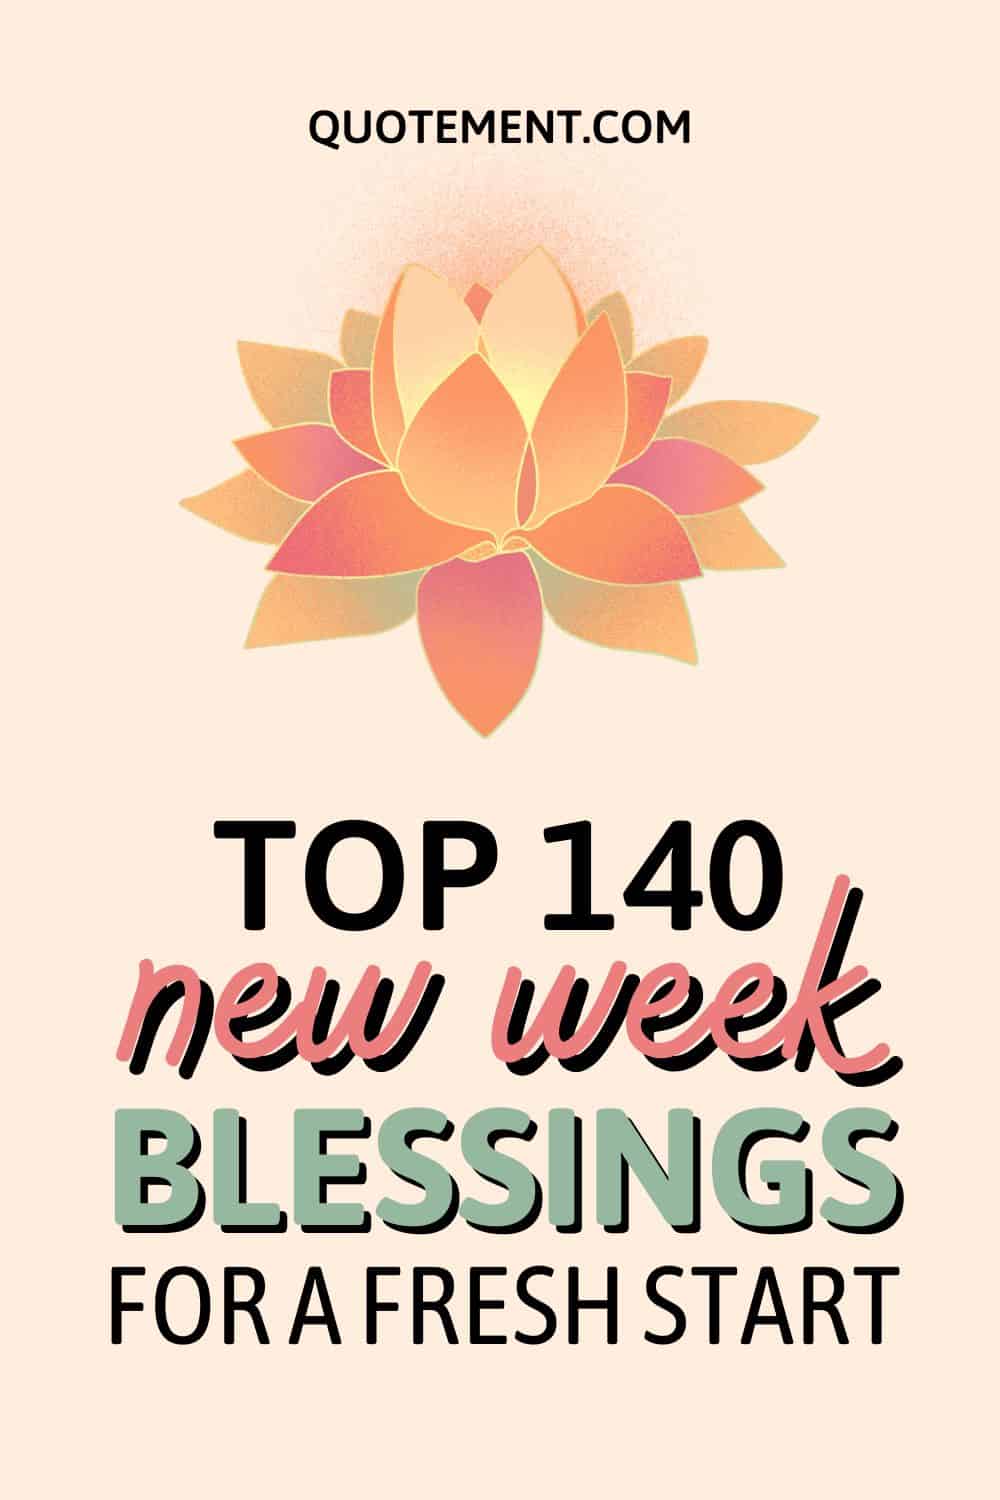 Top 140 Uplifting New Week Blessings To Inspire You